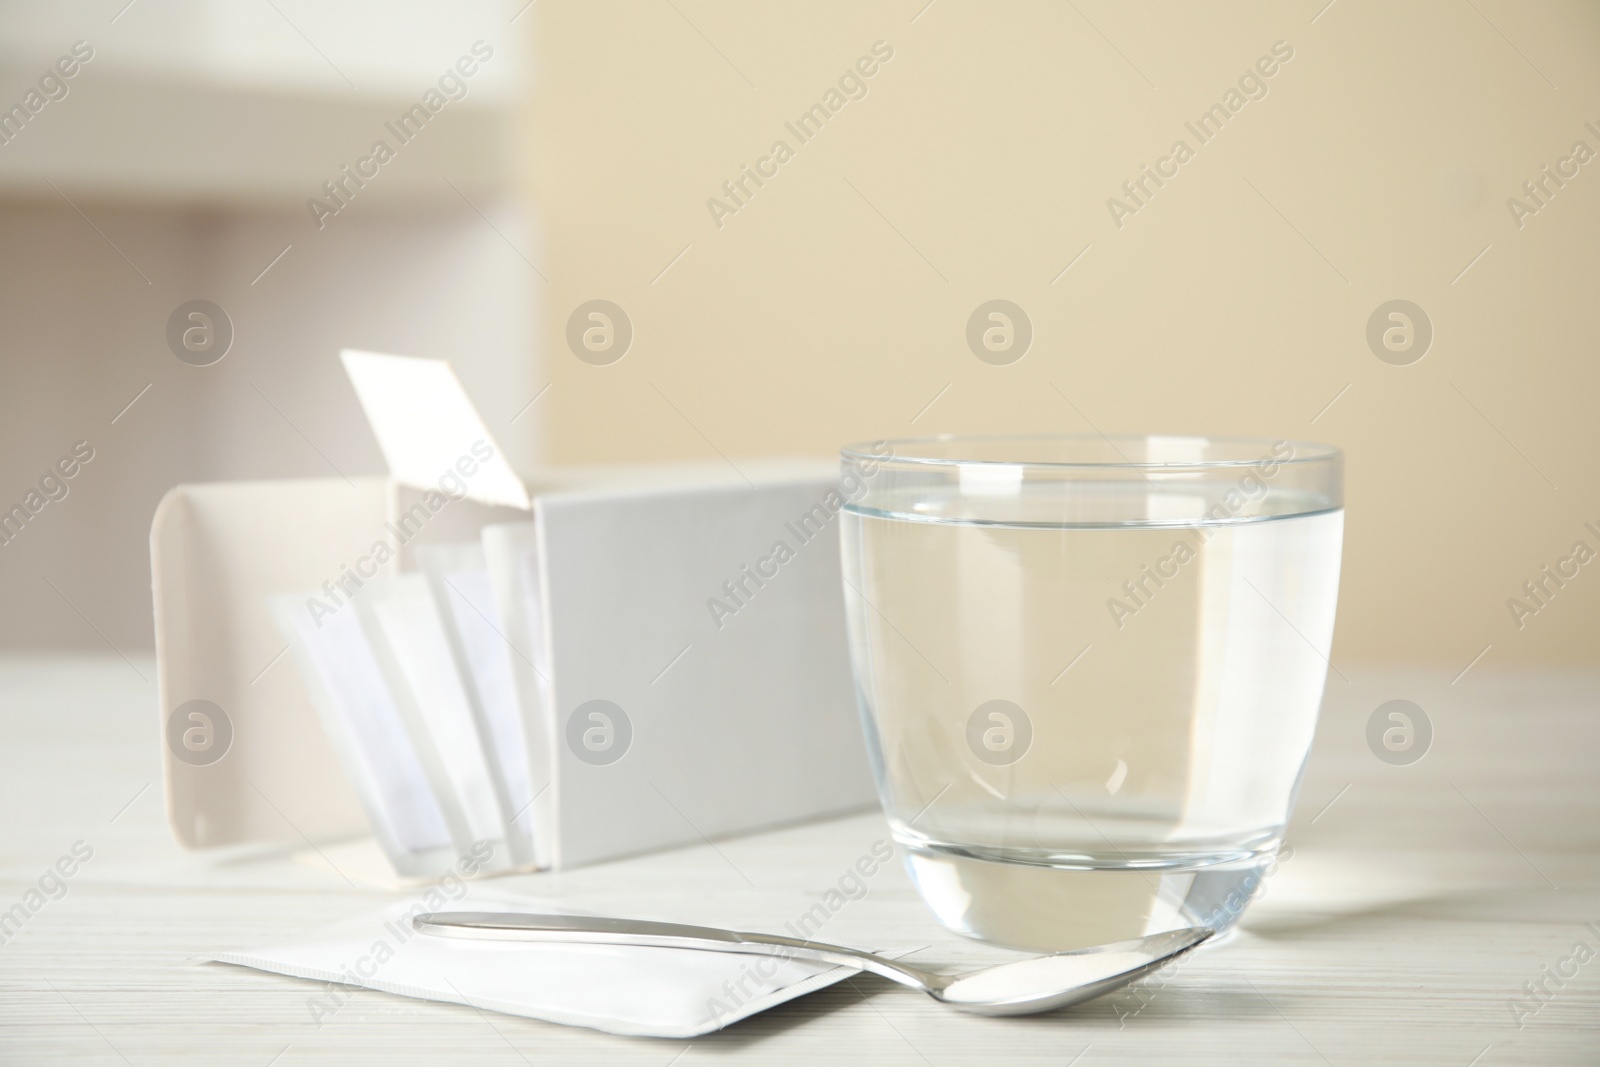 Photo of Medicine sachets, glass of water and spoon on white table